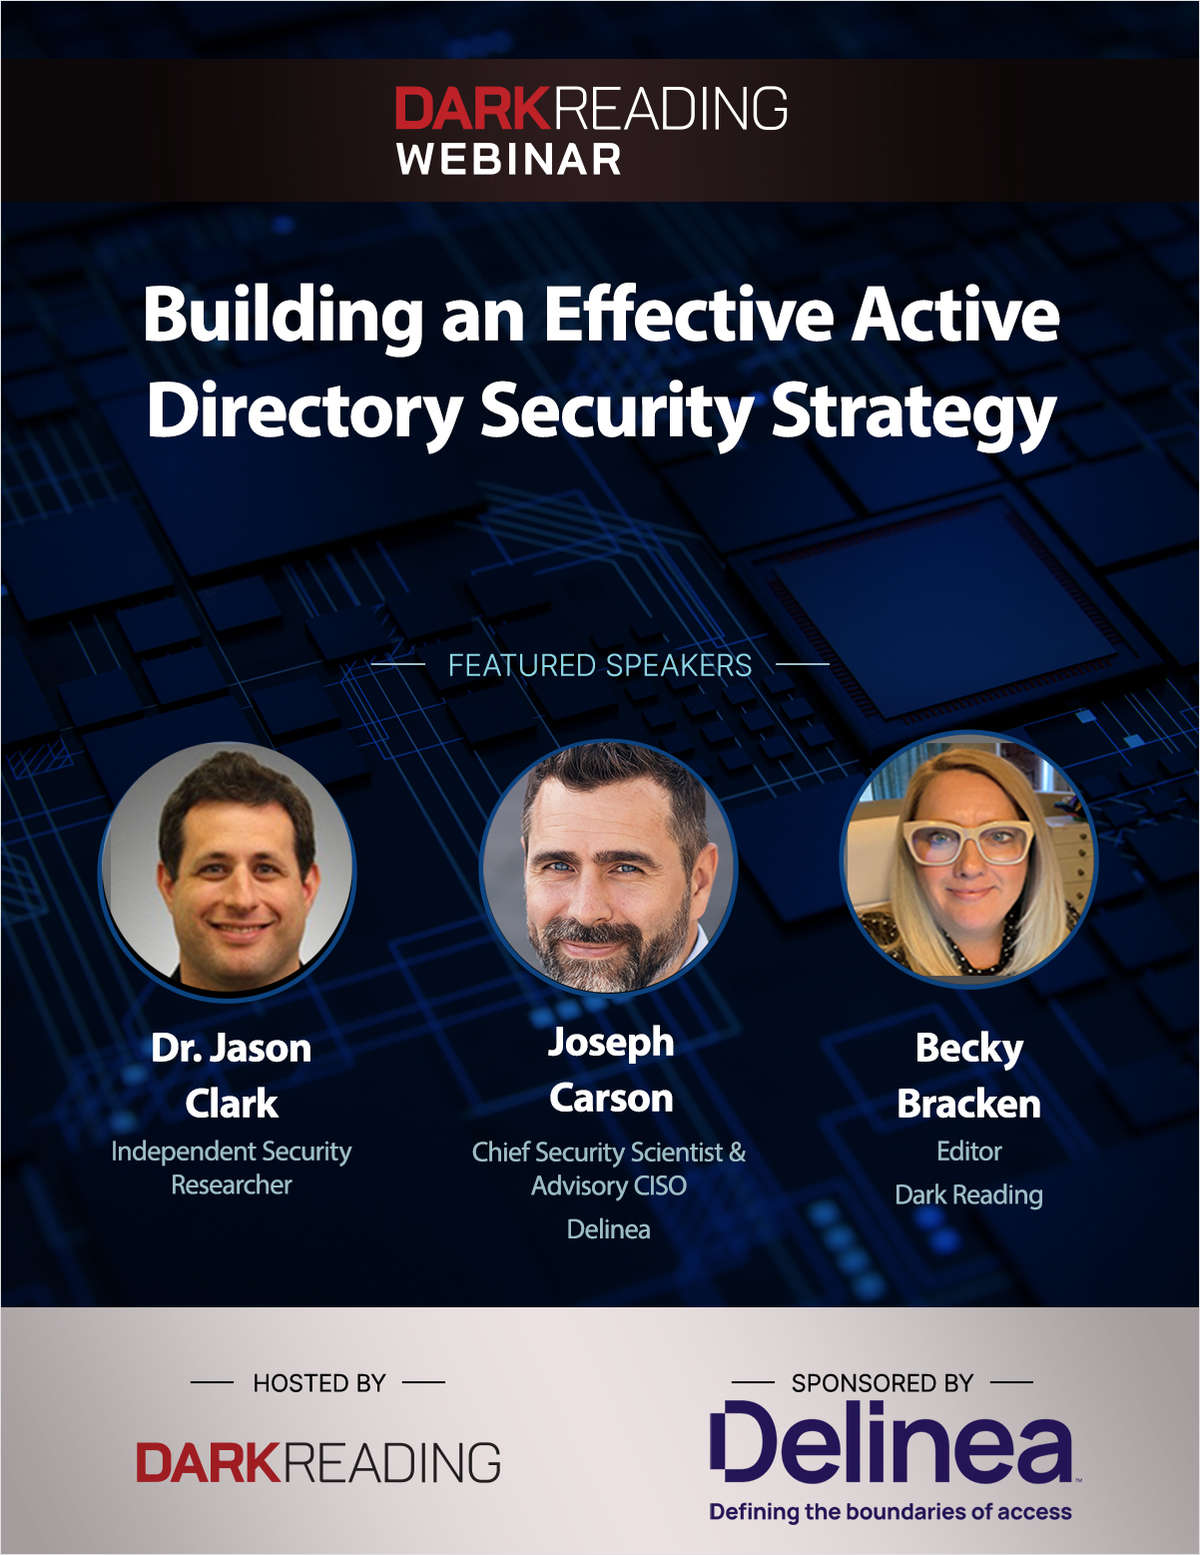 Building an Effective Active Directory Security Strategy